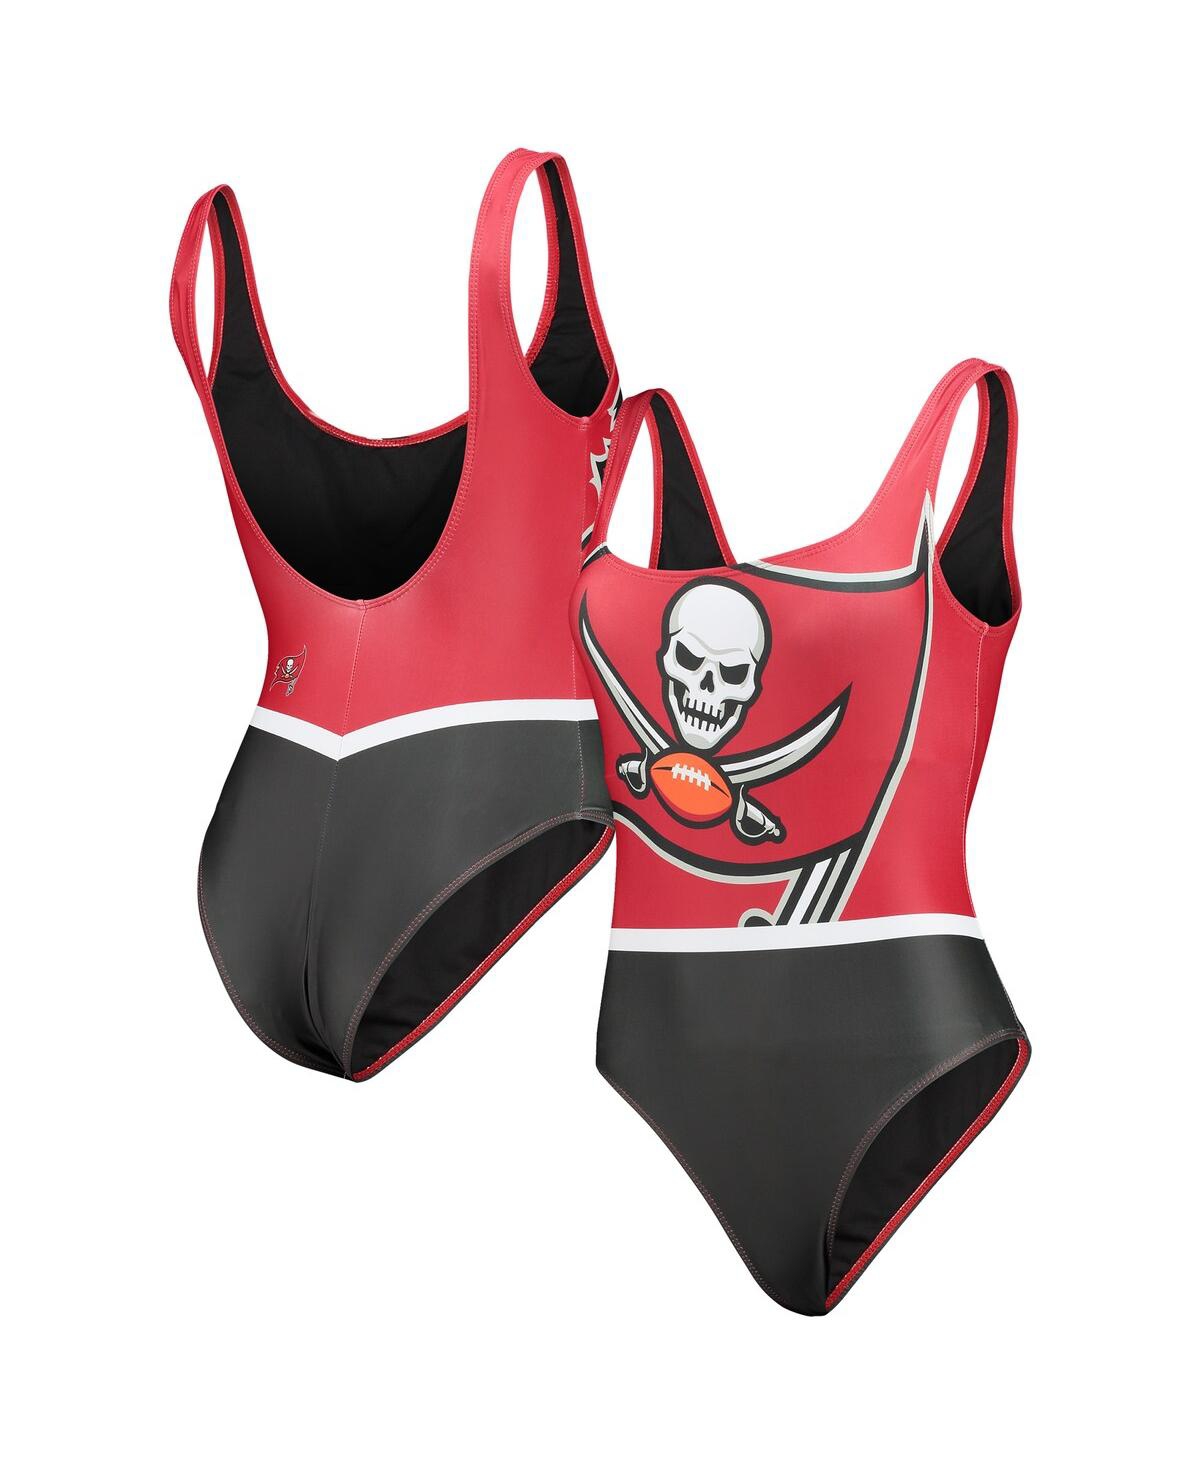 Women's Foco Red Tampa Bay Buccaneers Team One-Piece Swimsuit - Red